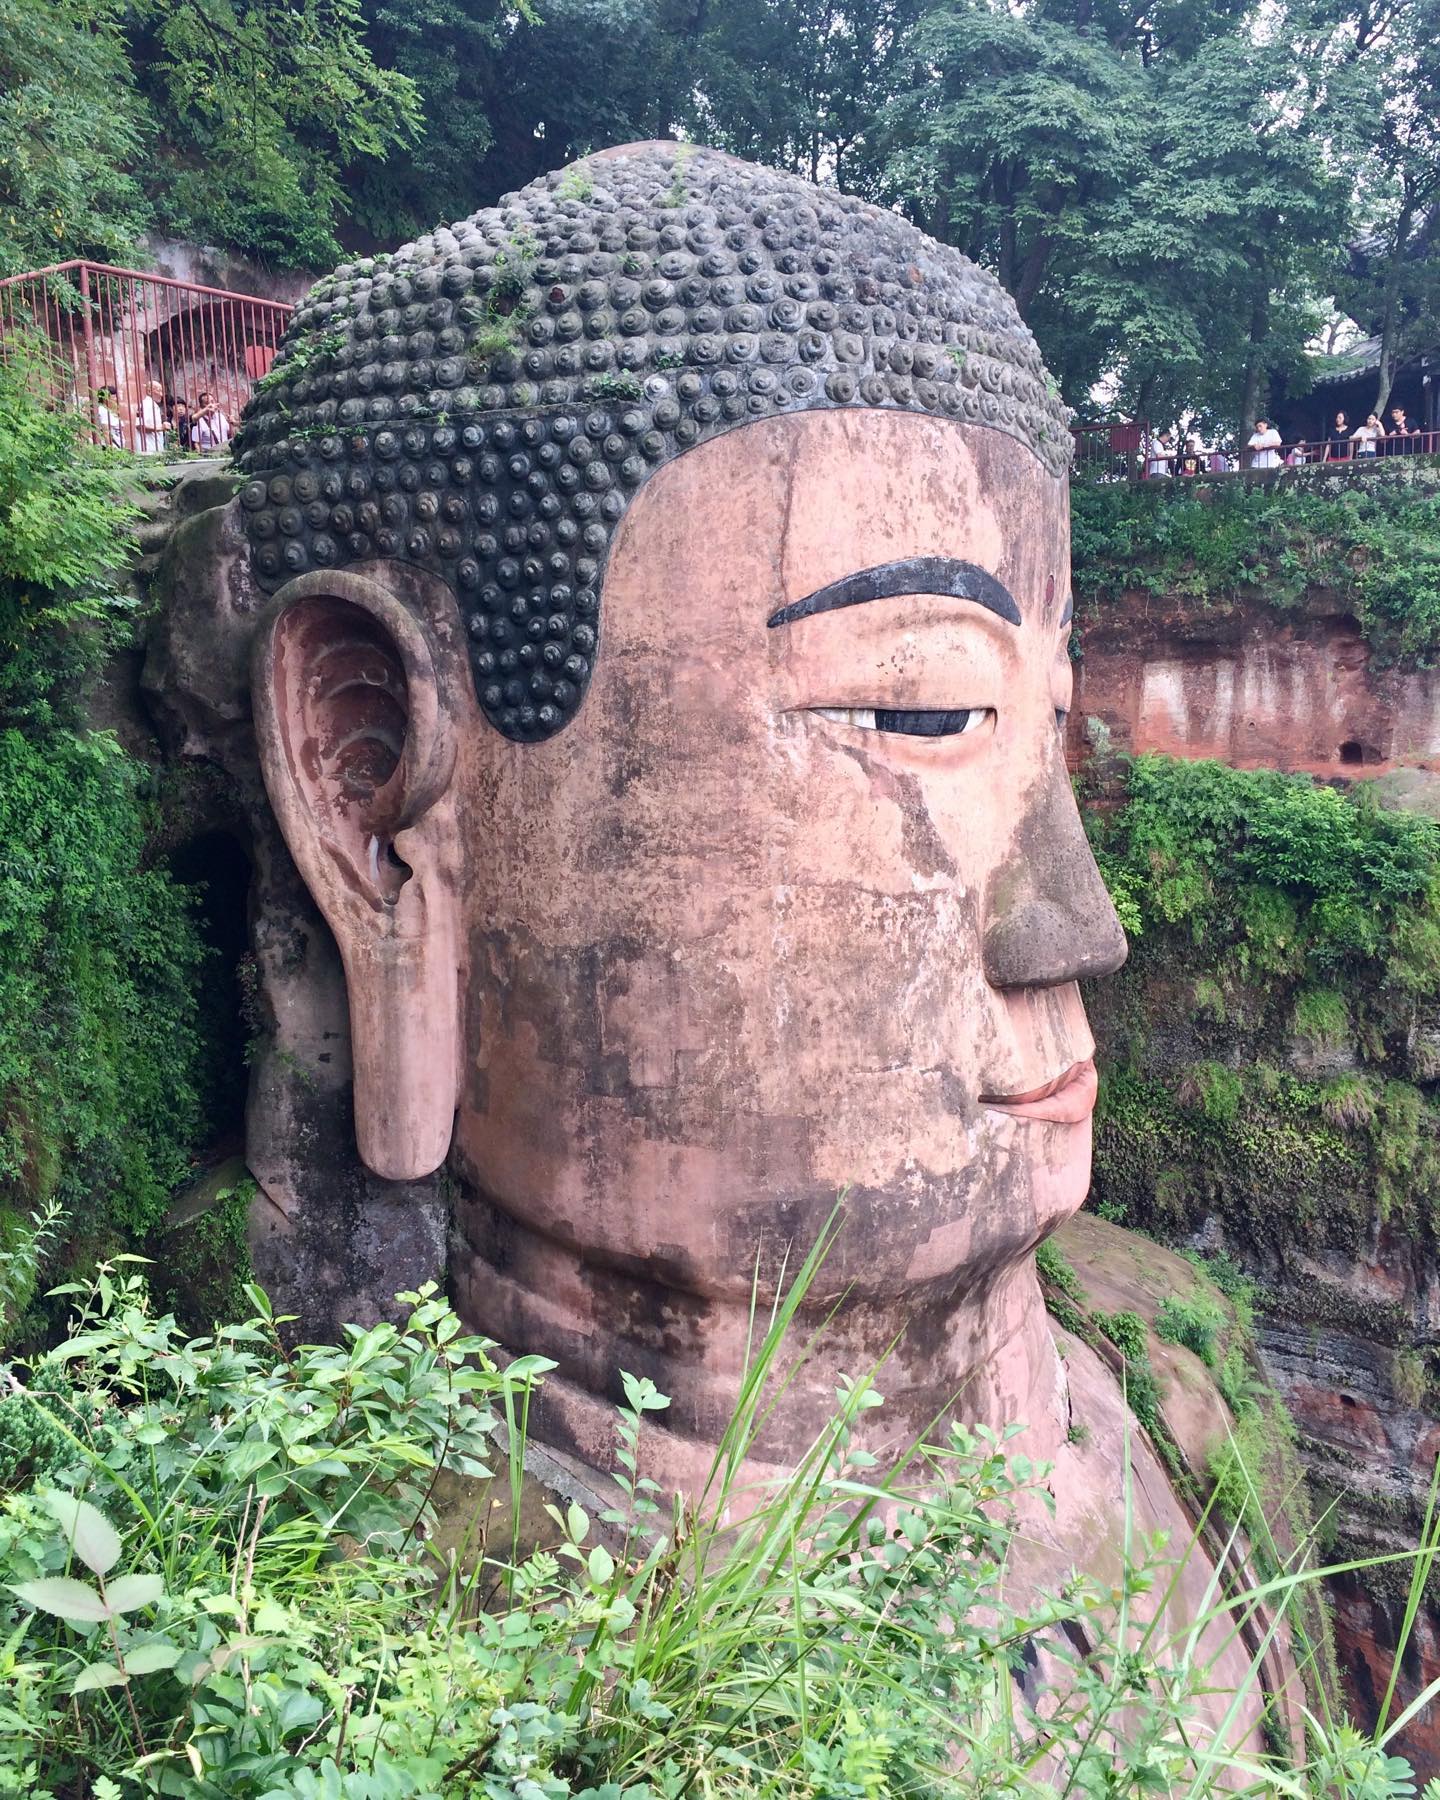 Leshan, China 🇨🇳.
.
The Giant Buddha at Leshan is the largest stone Buddha in the world. It’s carved into the rock on the banks of the river. It’s so big, it’s head is 15m big and you could easily sit on one of its toe nails!
.
#travel #china #buddha #leshan #backpacker #chinese #sichuan #chengdu #traveller #backpacking #asia #explore #instatravel #travelgram #buddhism #leshangiantbuddha #offthebeatenpath #stone #carving #traveltheworld #chinatravel